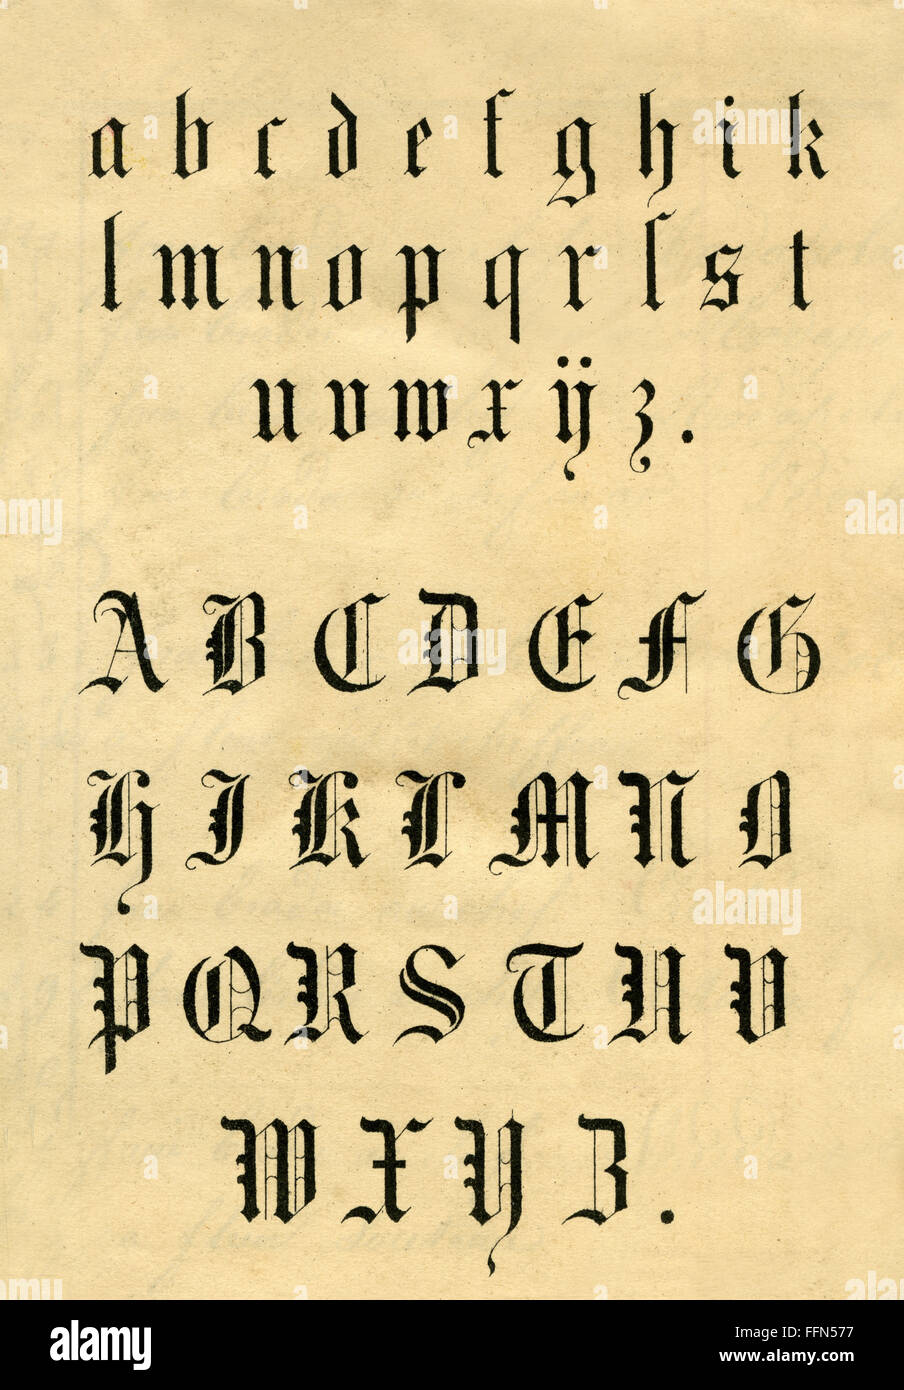 writing, script, German type, alphabet, Germany, circa 1855, Additional-Rights-Clearences-Not Available Stock Photo